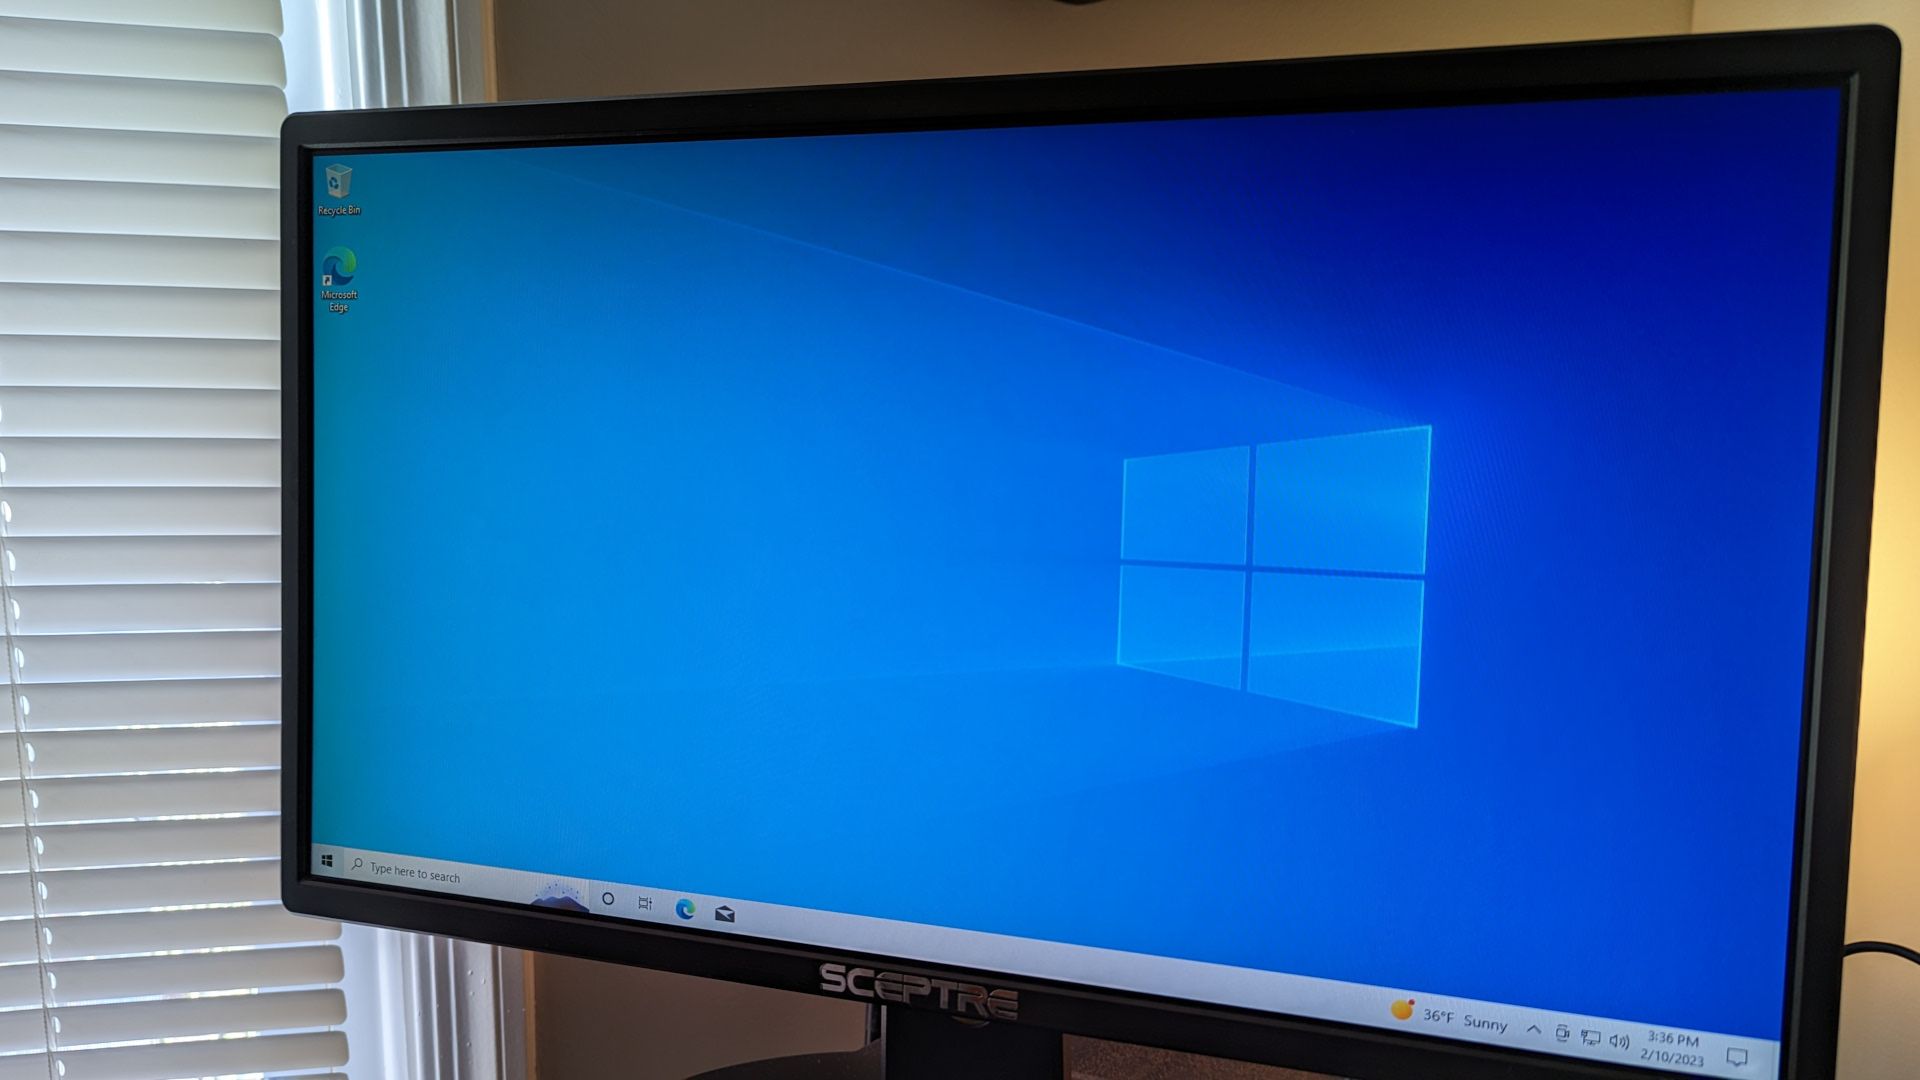 Computer monitor with the Windows 10 desktop on screen.